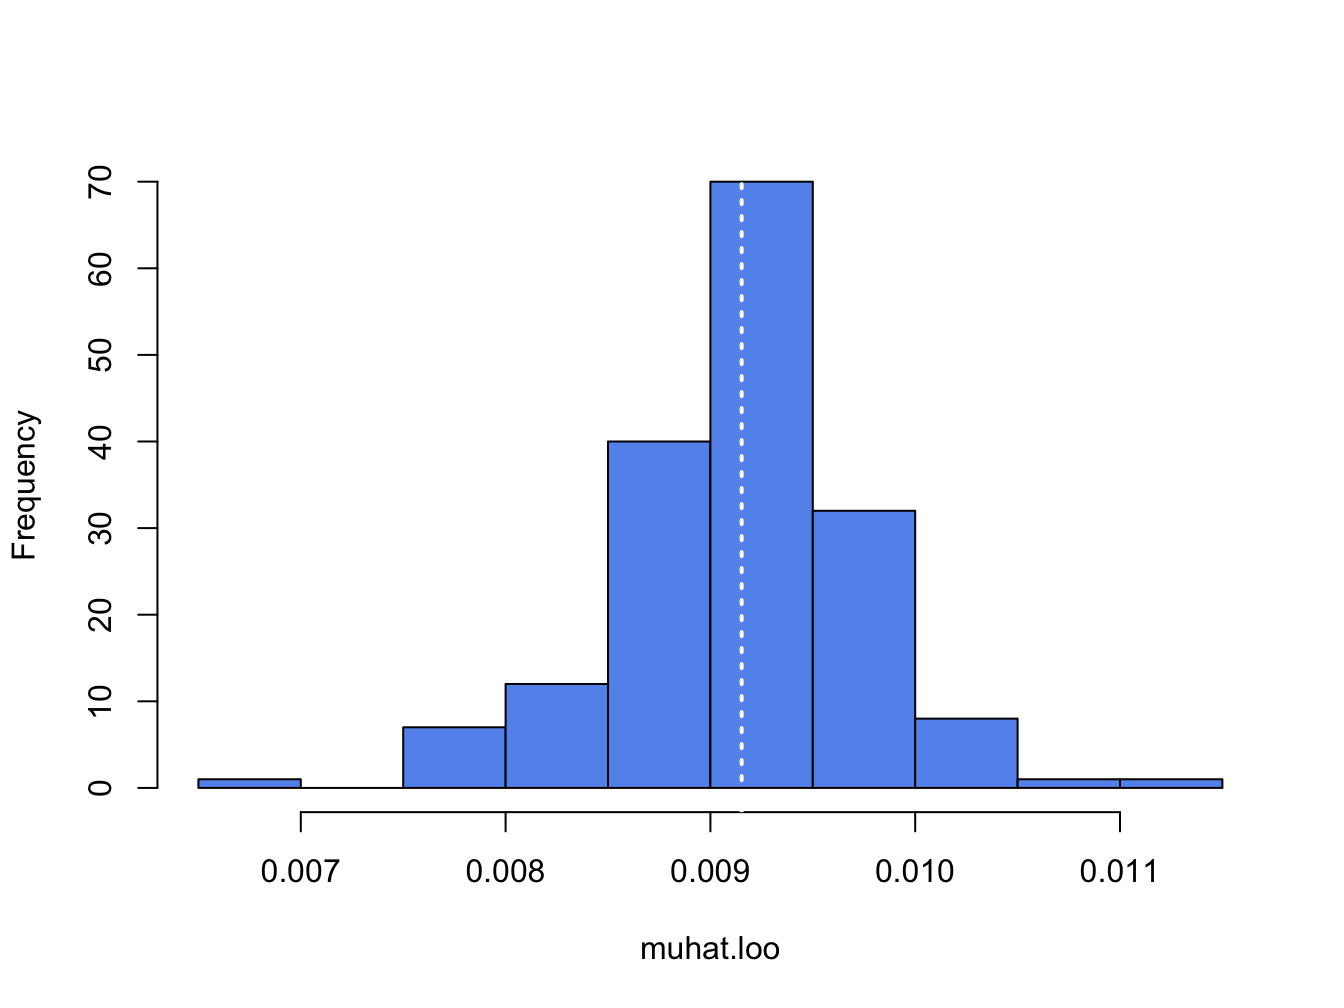 Histogram of leave-one-out estimator of $\mu$ for Microsoft.